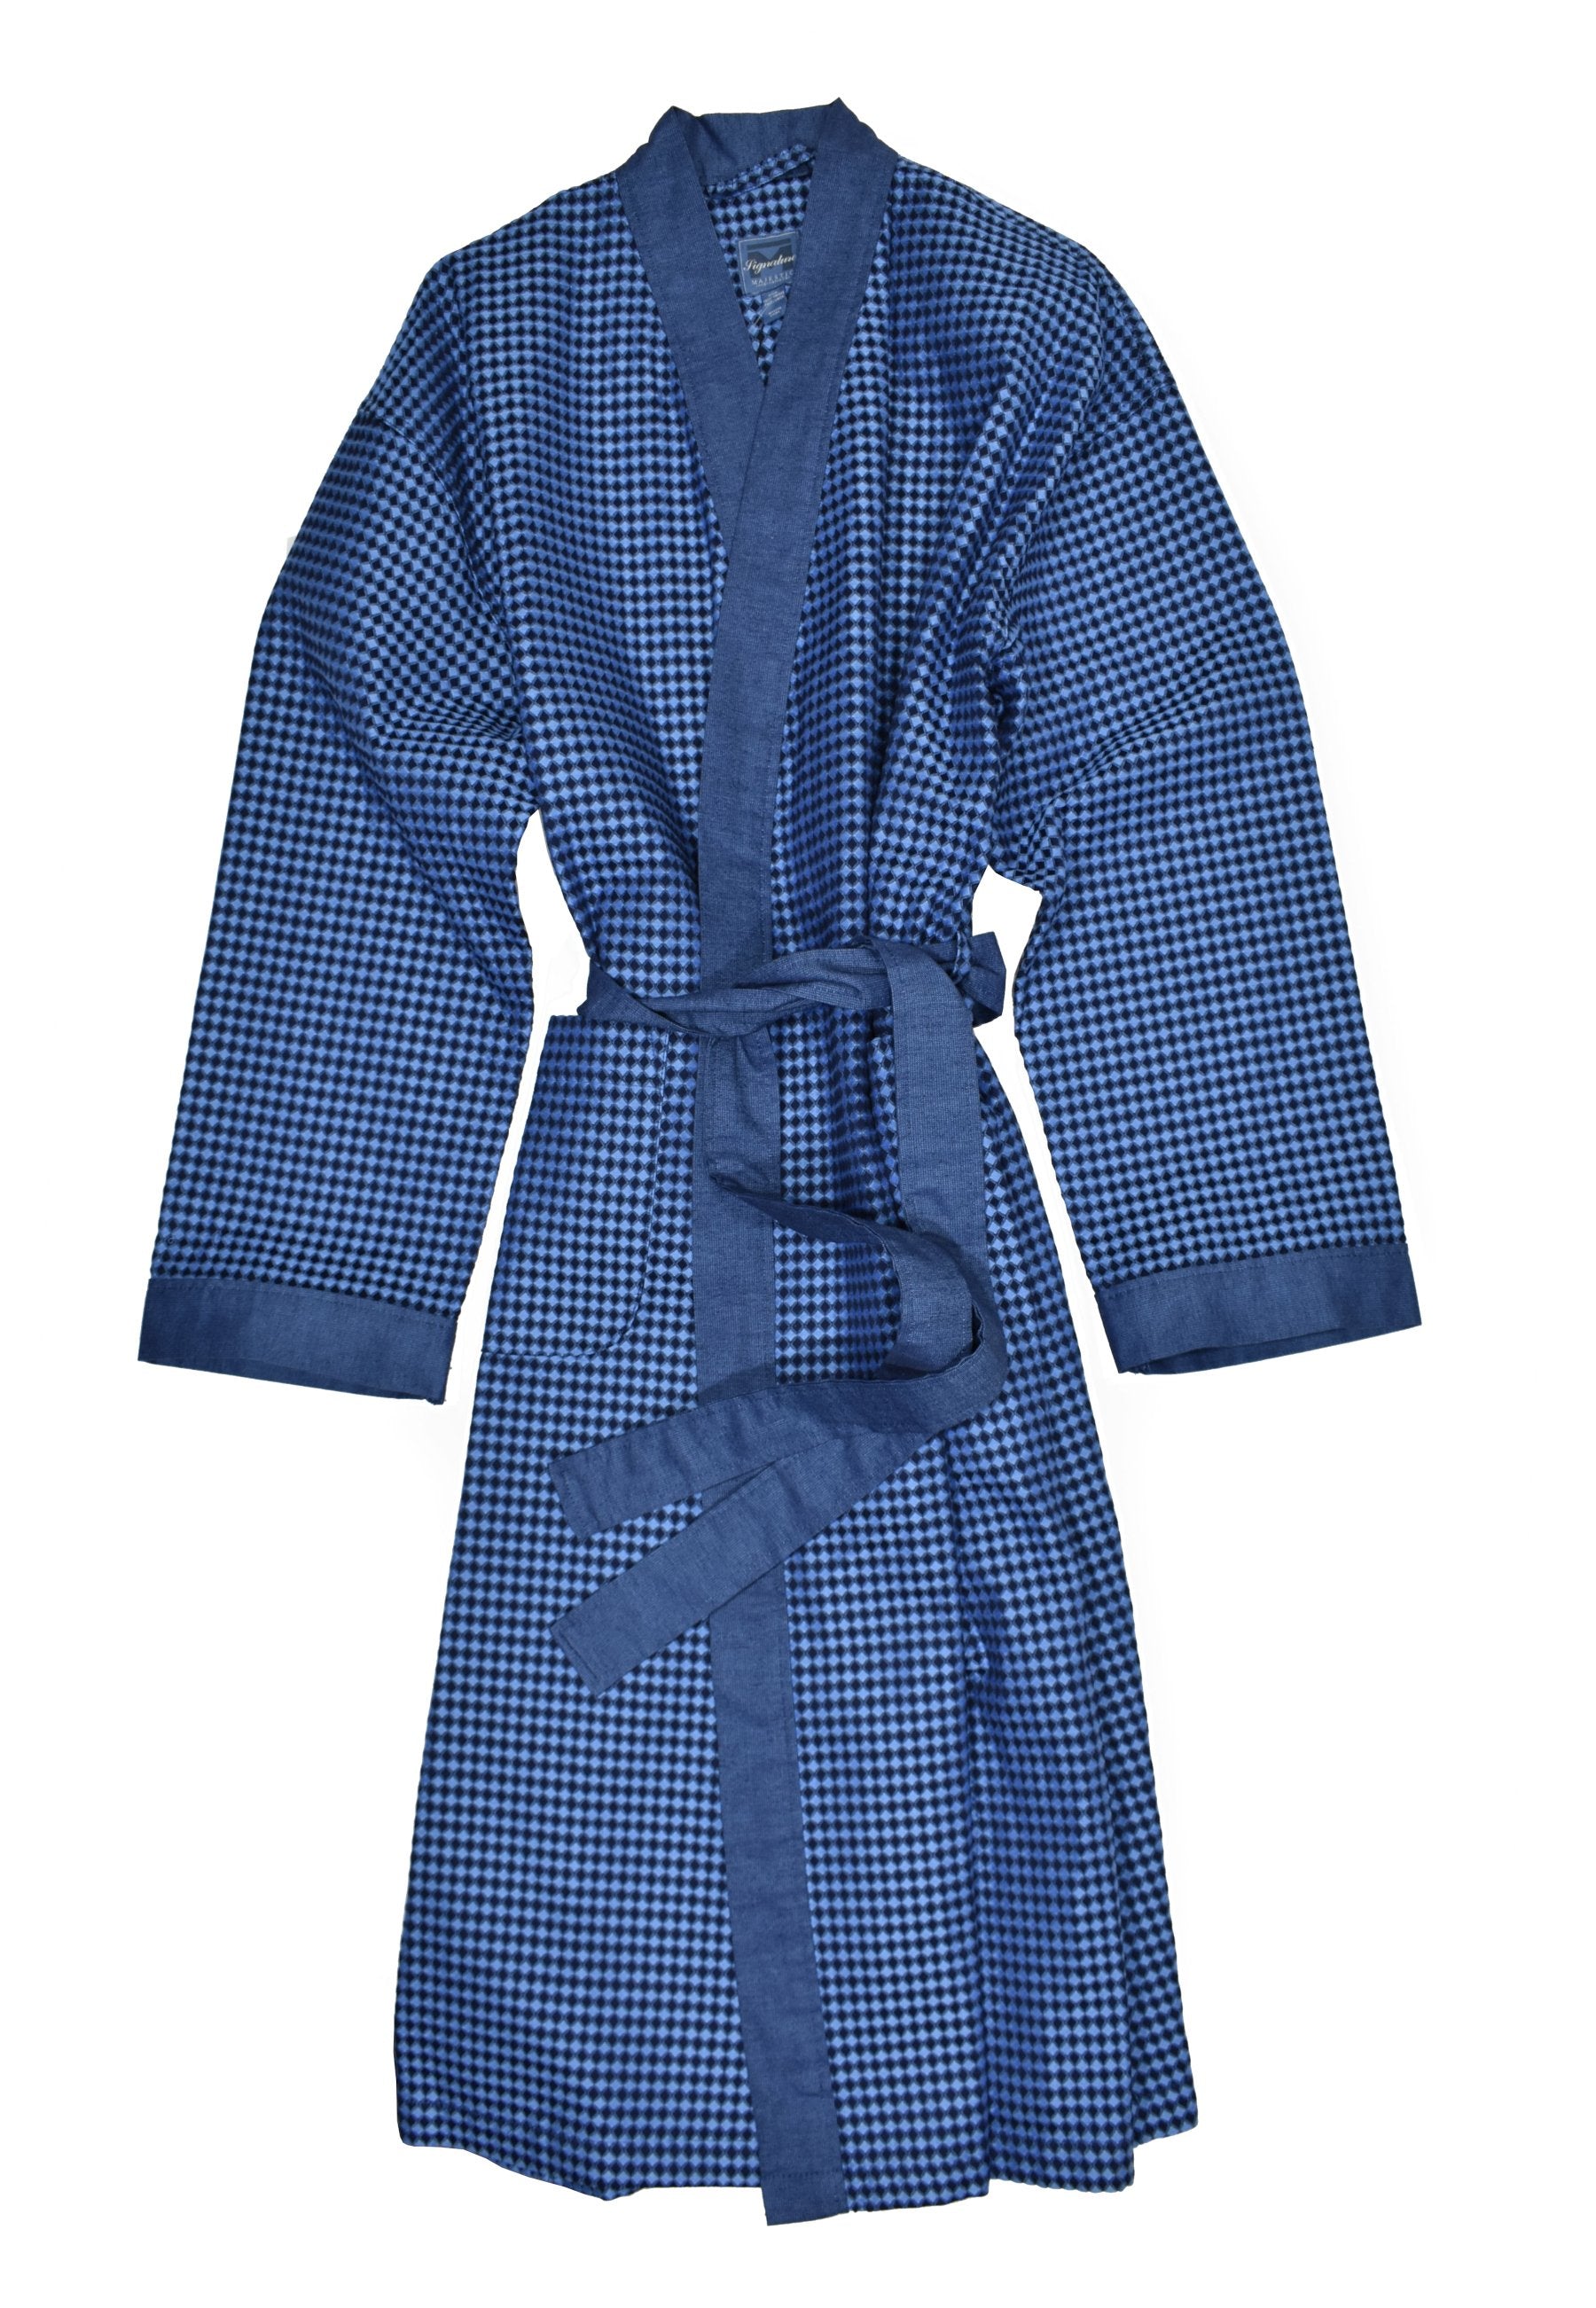 Treat yourself to a luxurious piece of nightwear with the Majestic Diamond Weave Robe. This elegant cotton blended robe features a diamond weave design mixing blue and navy with solid navy trim edges. It has classic styling with two pockets, a belt closure, and light to medium weight fabric, allowing you to enjoy an unfiltered sense of style and comfort. Indulge and upgrade your wardrobe with this exclusive and tasteful piece.